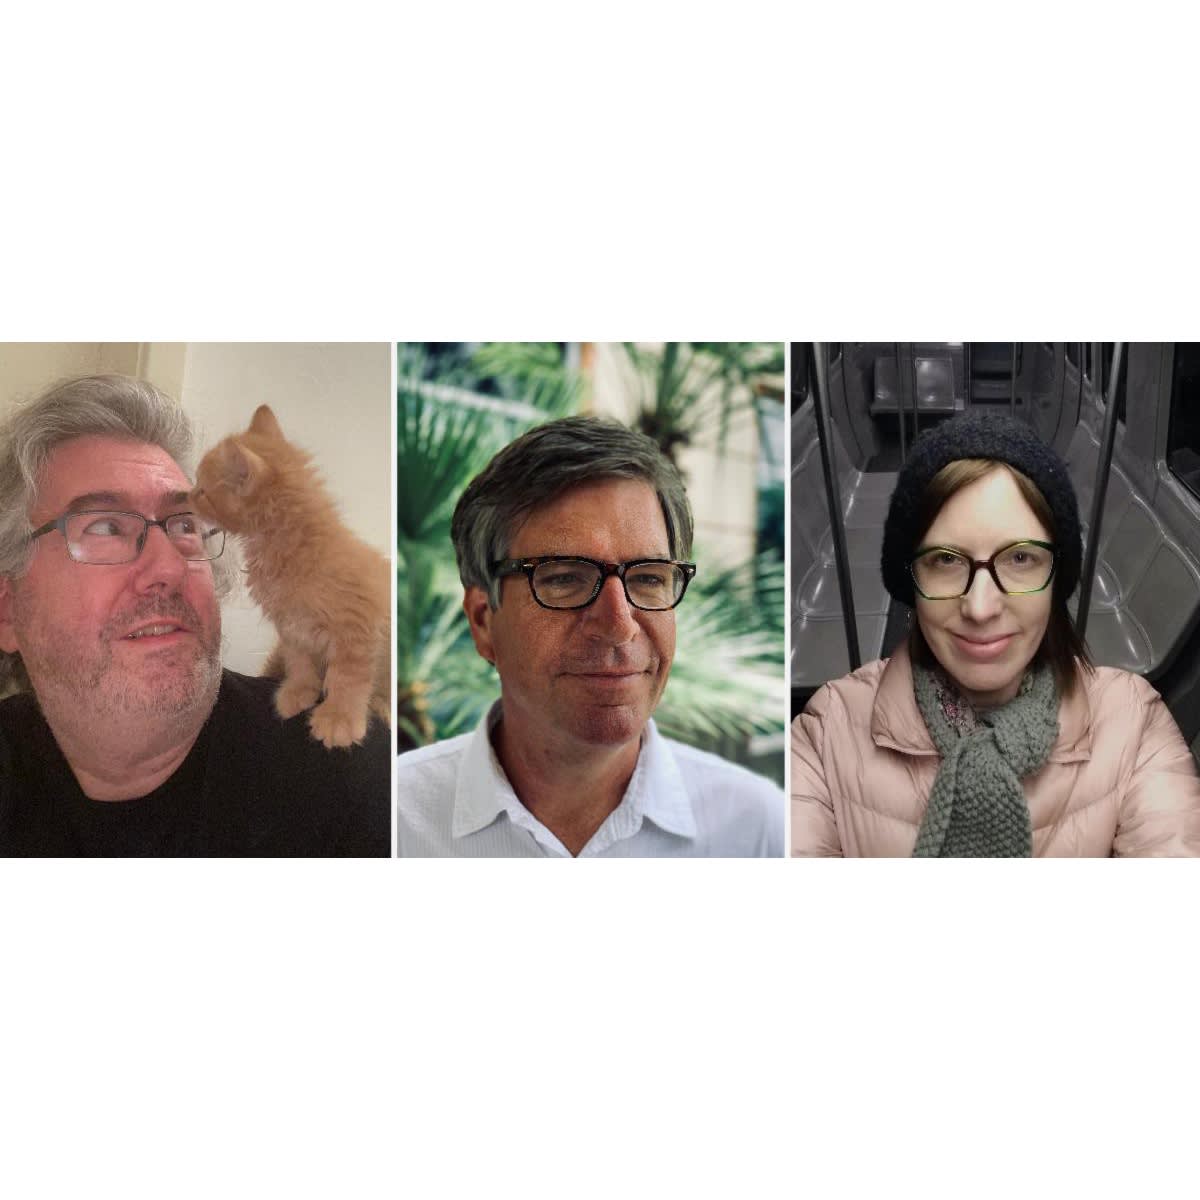 From the Studio: A conversation with David Aylsworth, Tommy Fitzpatrick and Emily Joyce